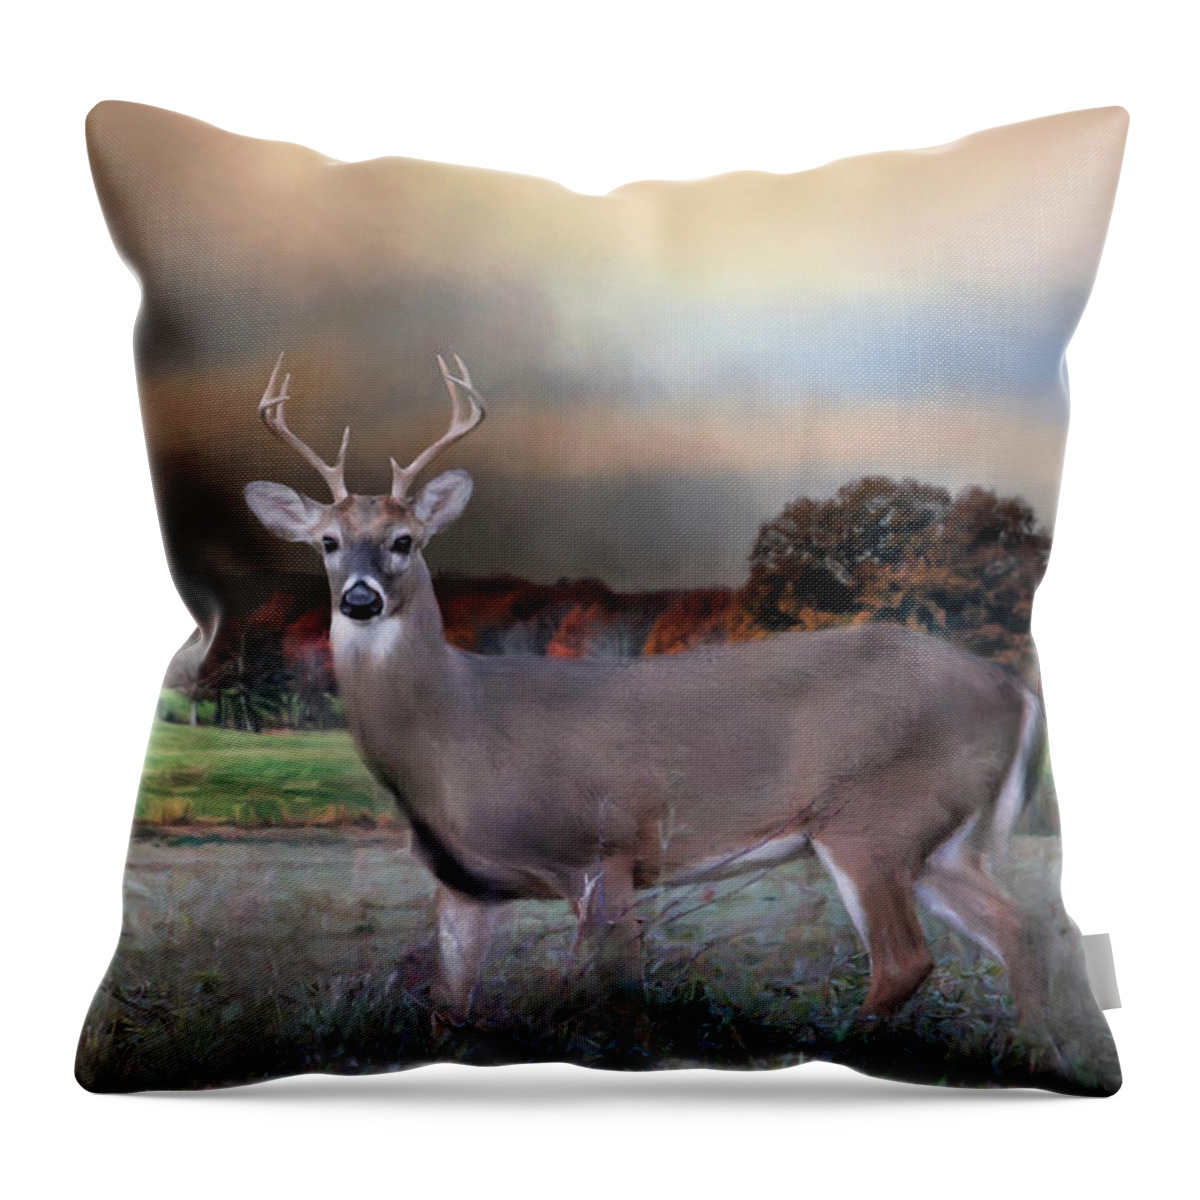 Jai Johnson Throw Pillow featuring the photograph Guardian Of The West Field by Jai Johnson